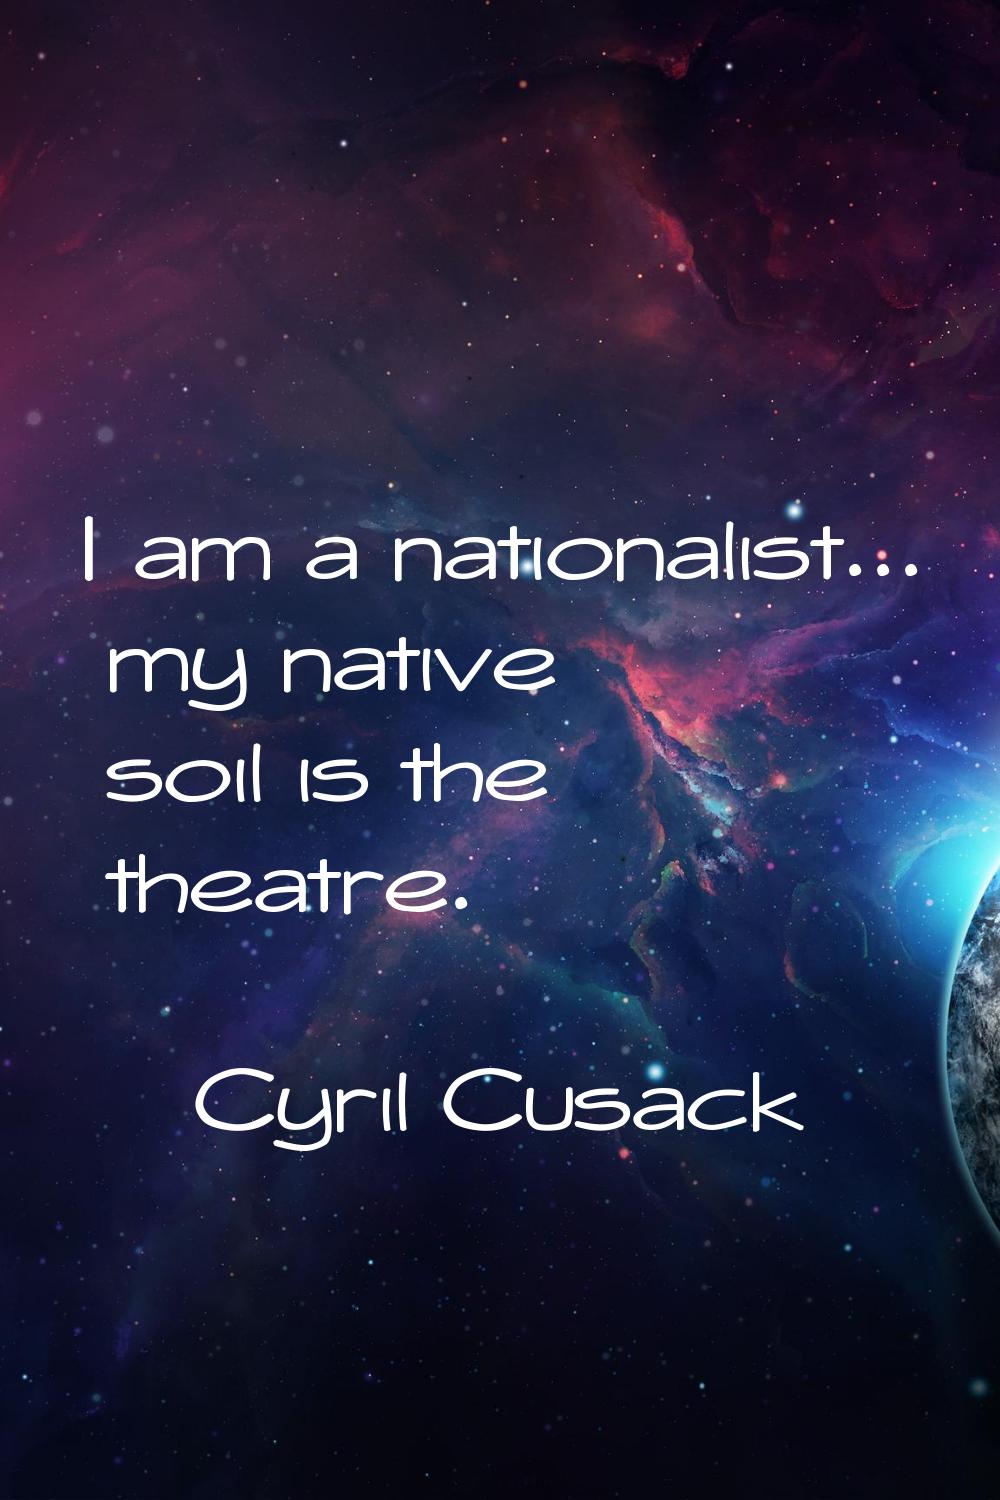 I am a nationalist... my native soil is the theatre.